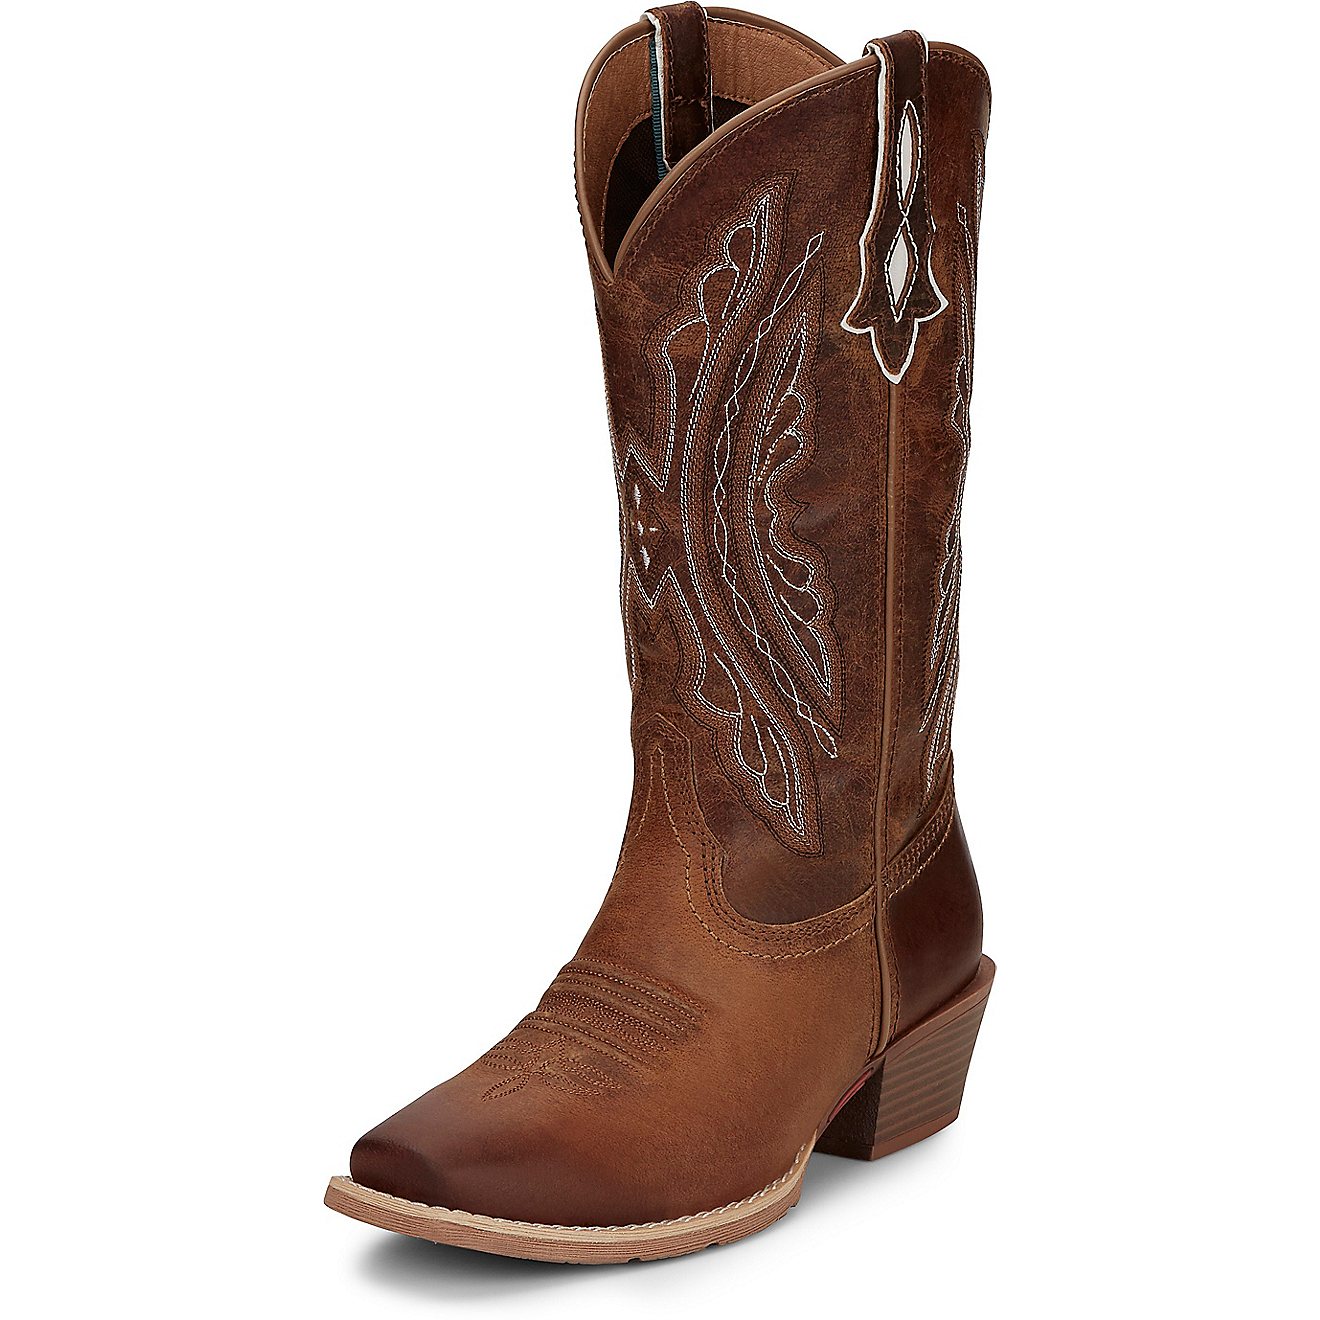 Justin Boots Women's Gypsy Rein Western Boots                                                                                    - view number 4